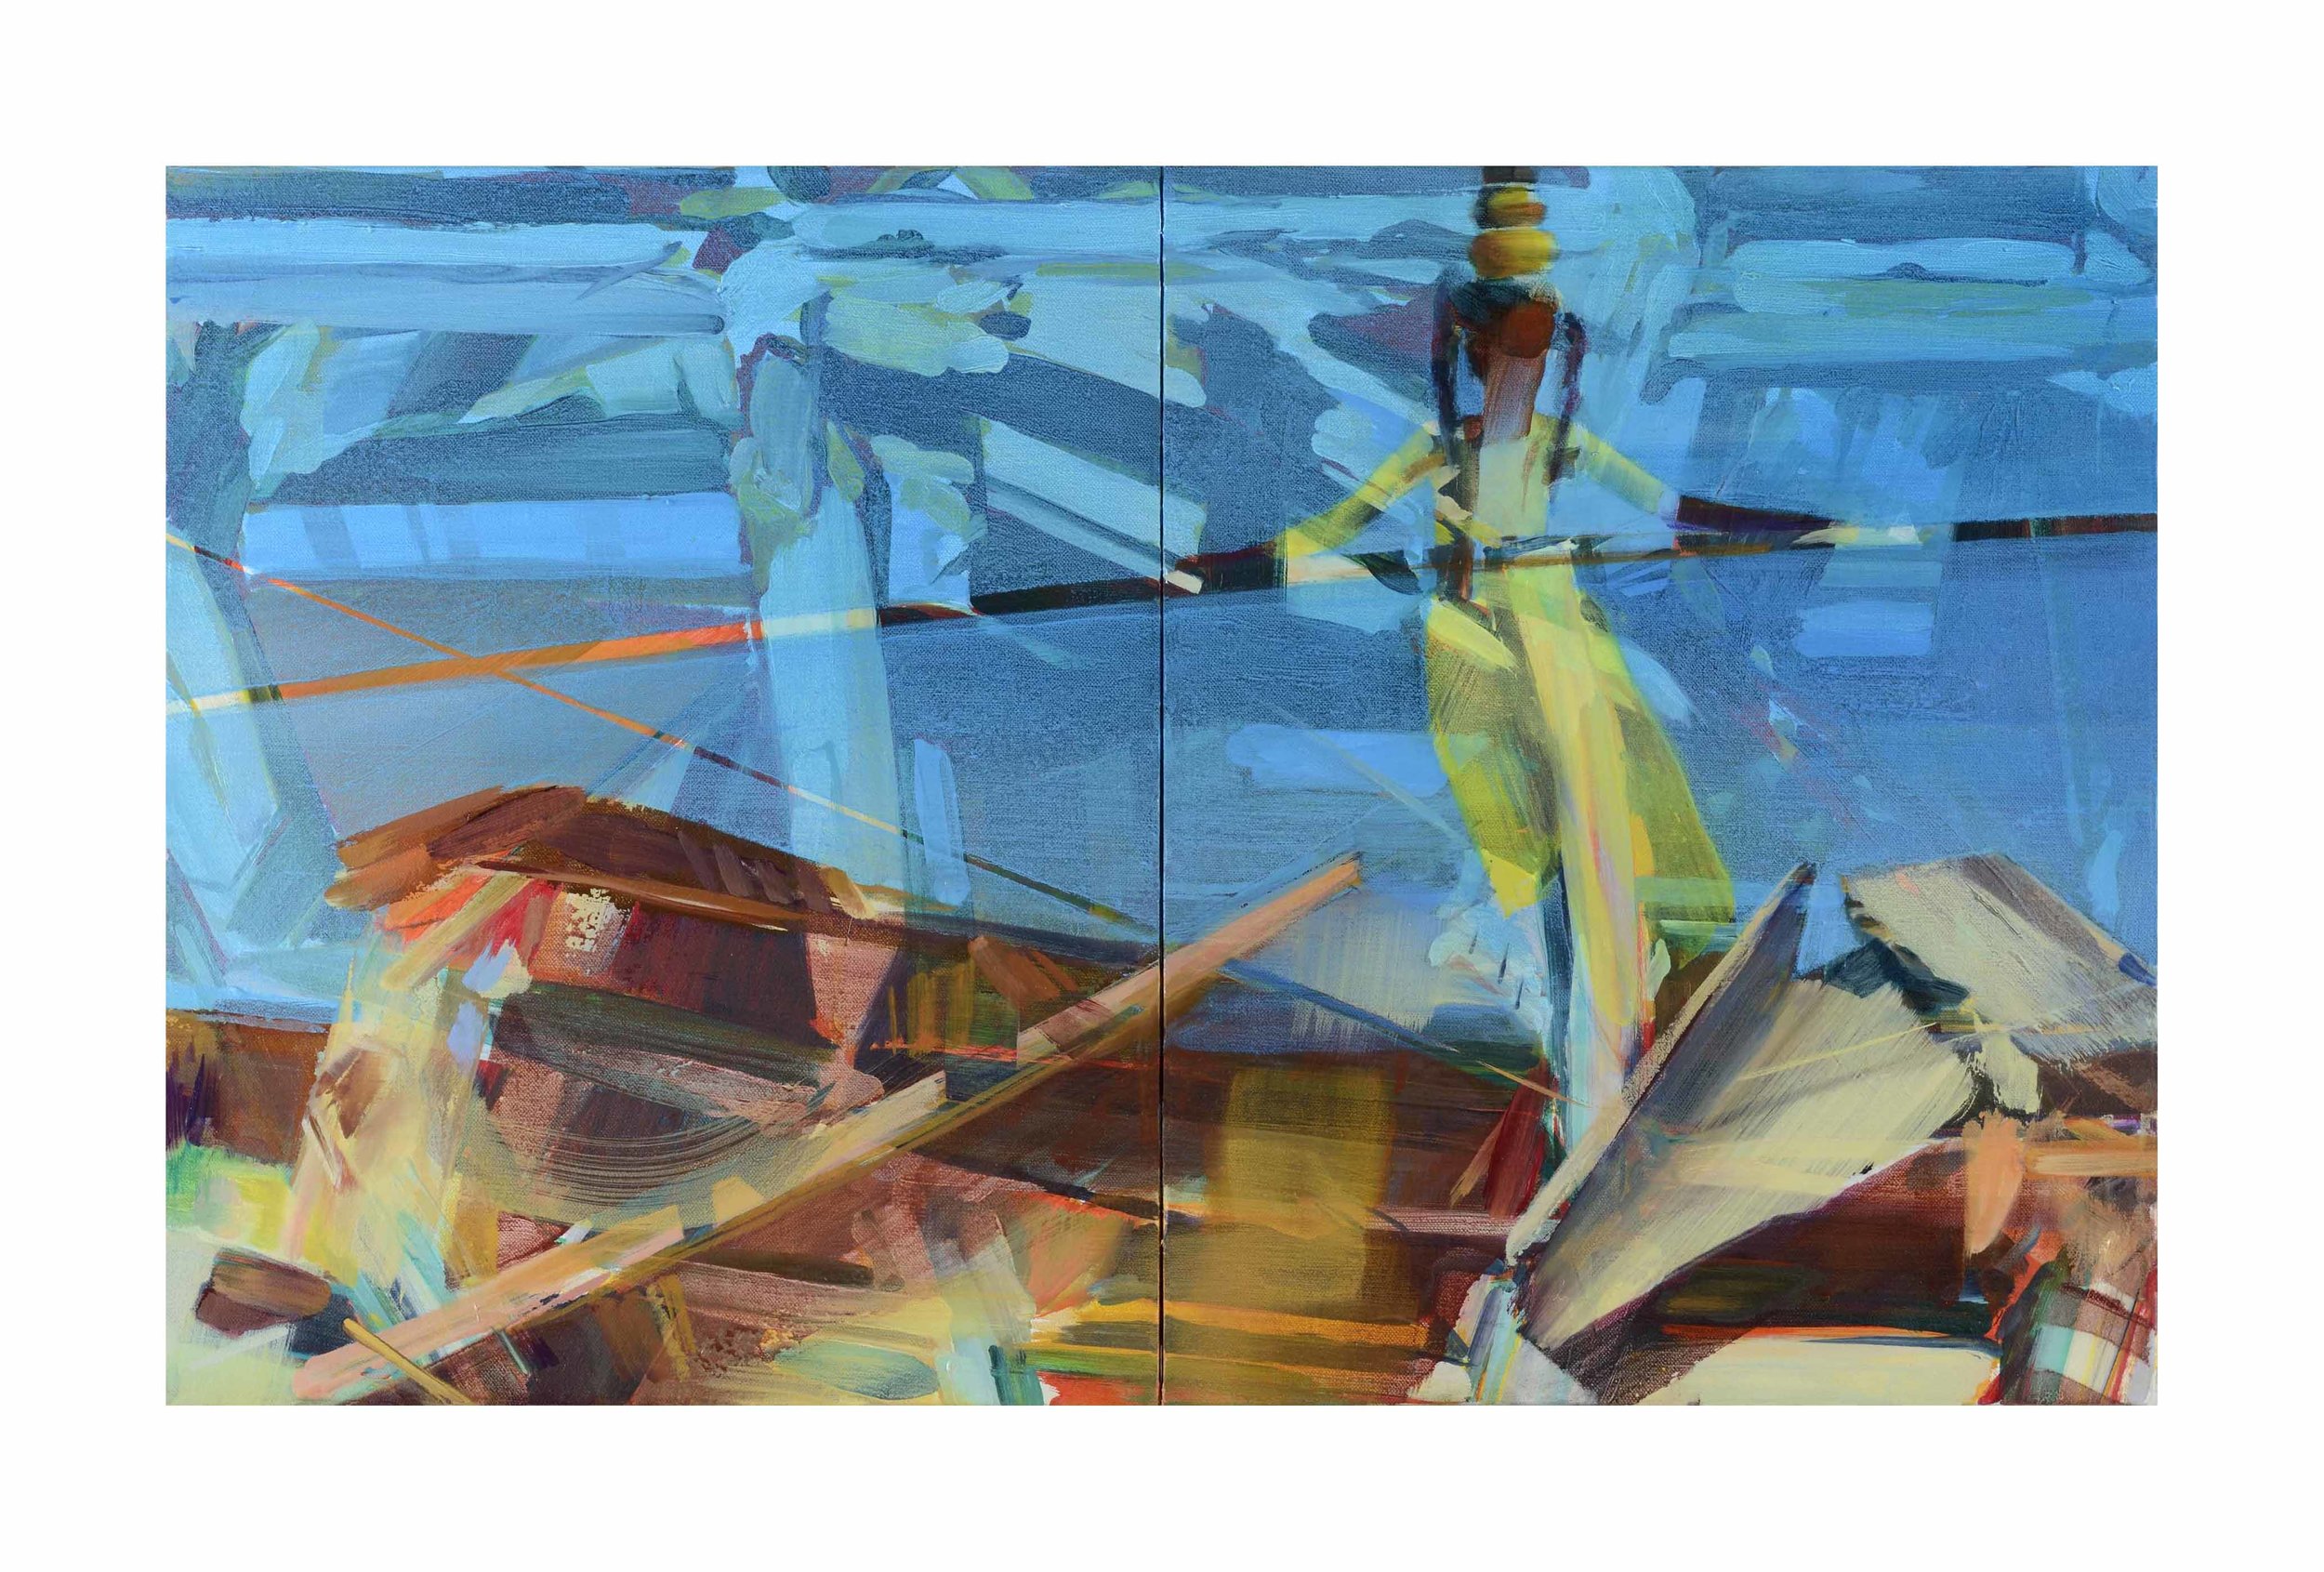   Setting a good trajectory, &nbsp;2017, oil on canvas, 41 x 66cm (diptych). Private collection, France 